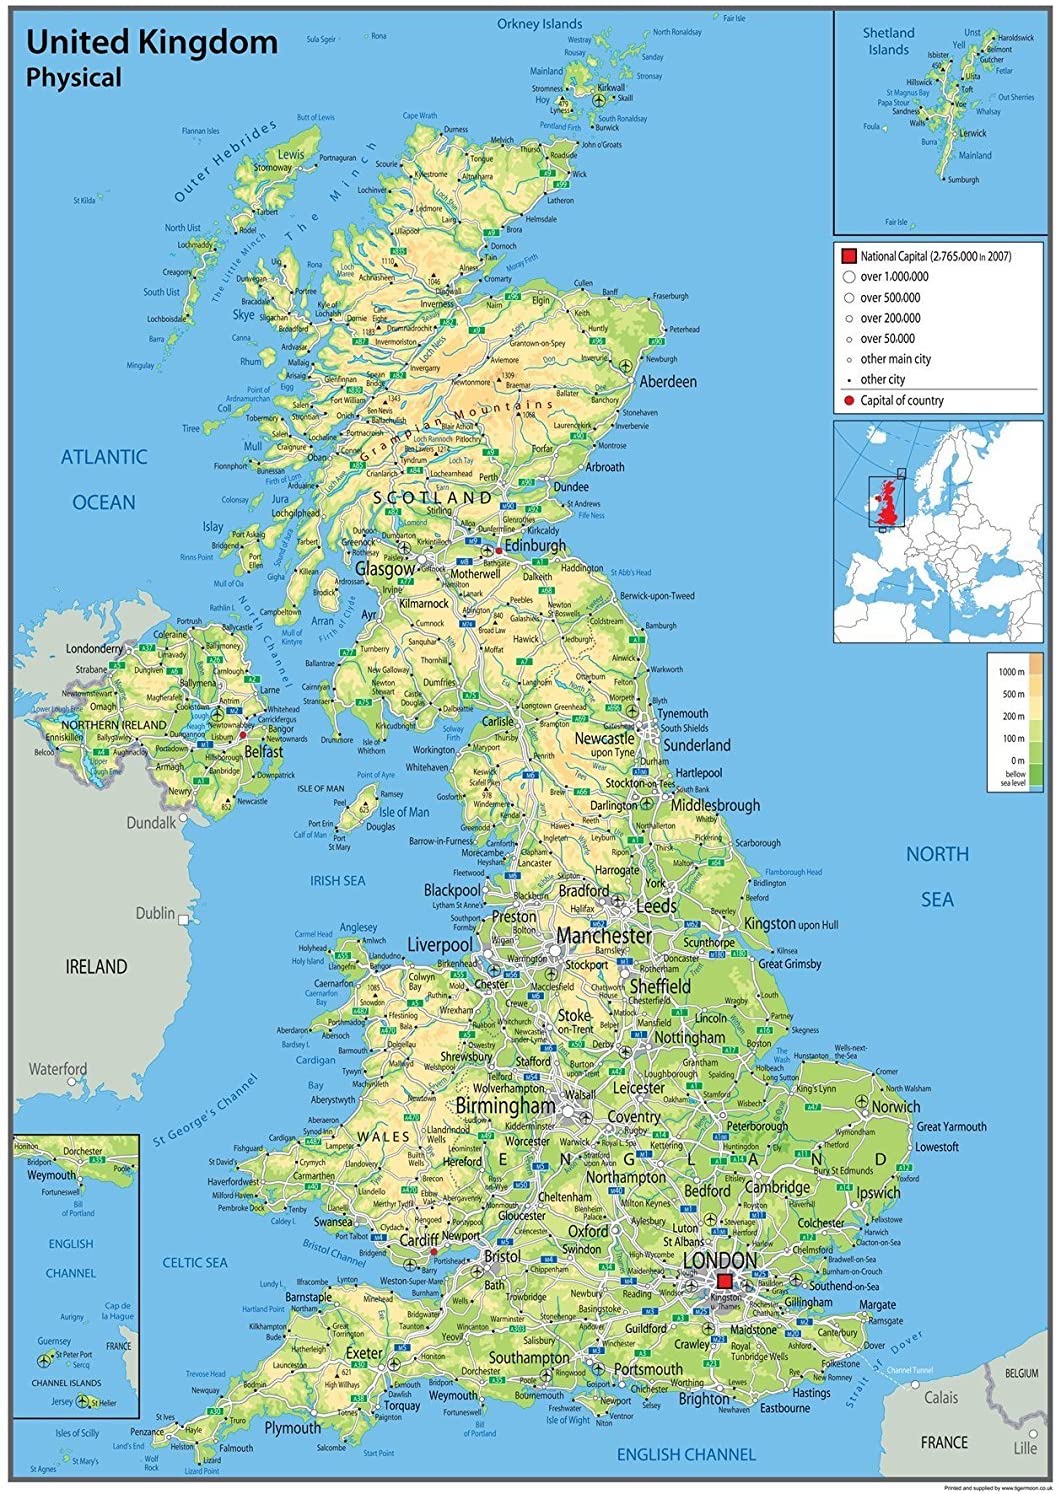 Buy United Kingdom Map x 70 Centimetres Laminated In Classroom, Office And Home [GA] Online in Indonesia. B07F3BRBPT